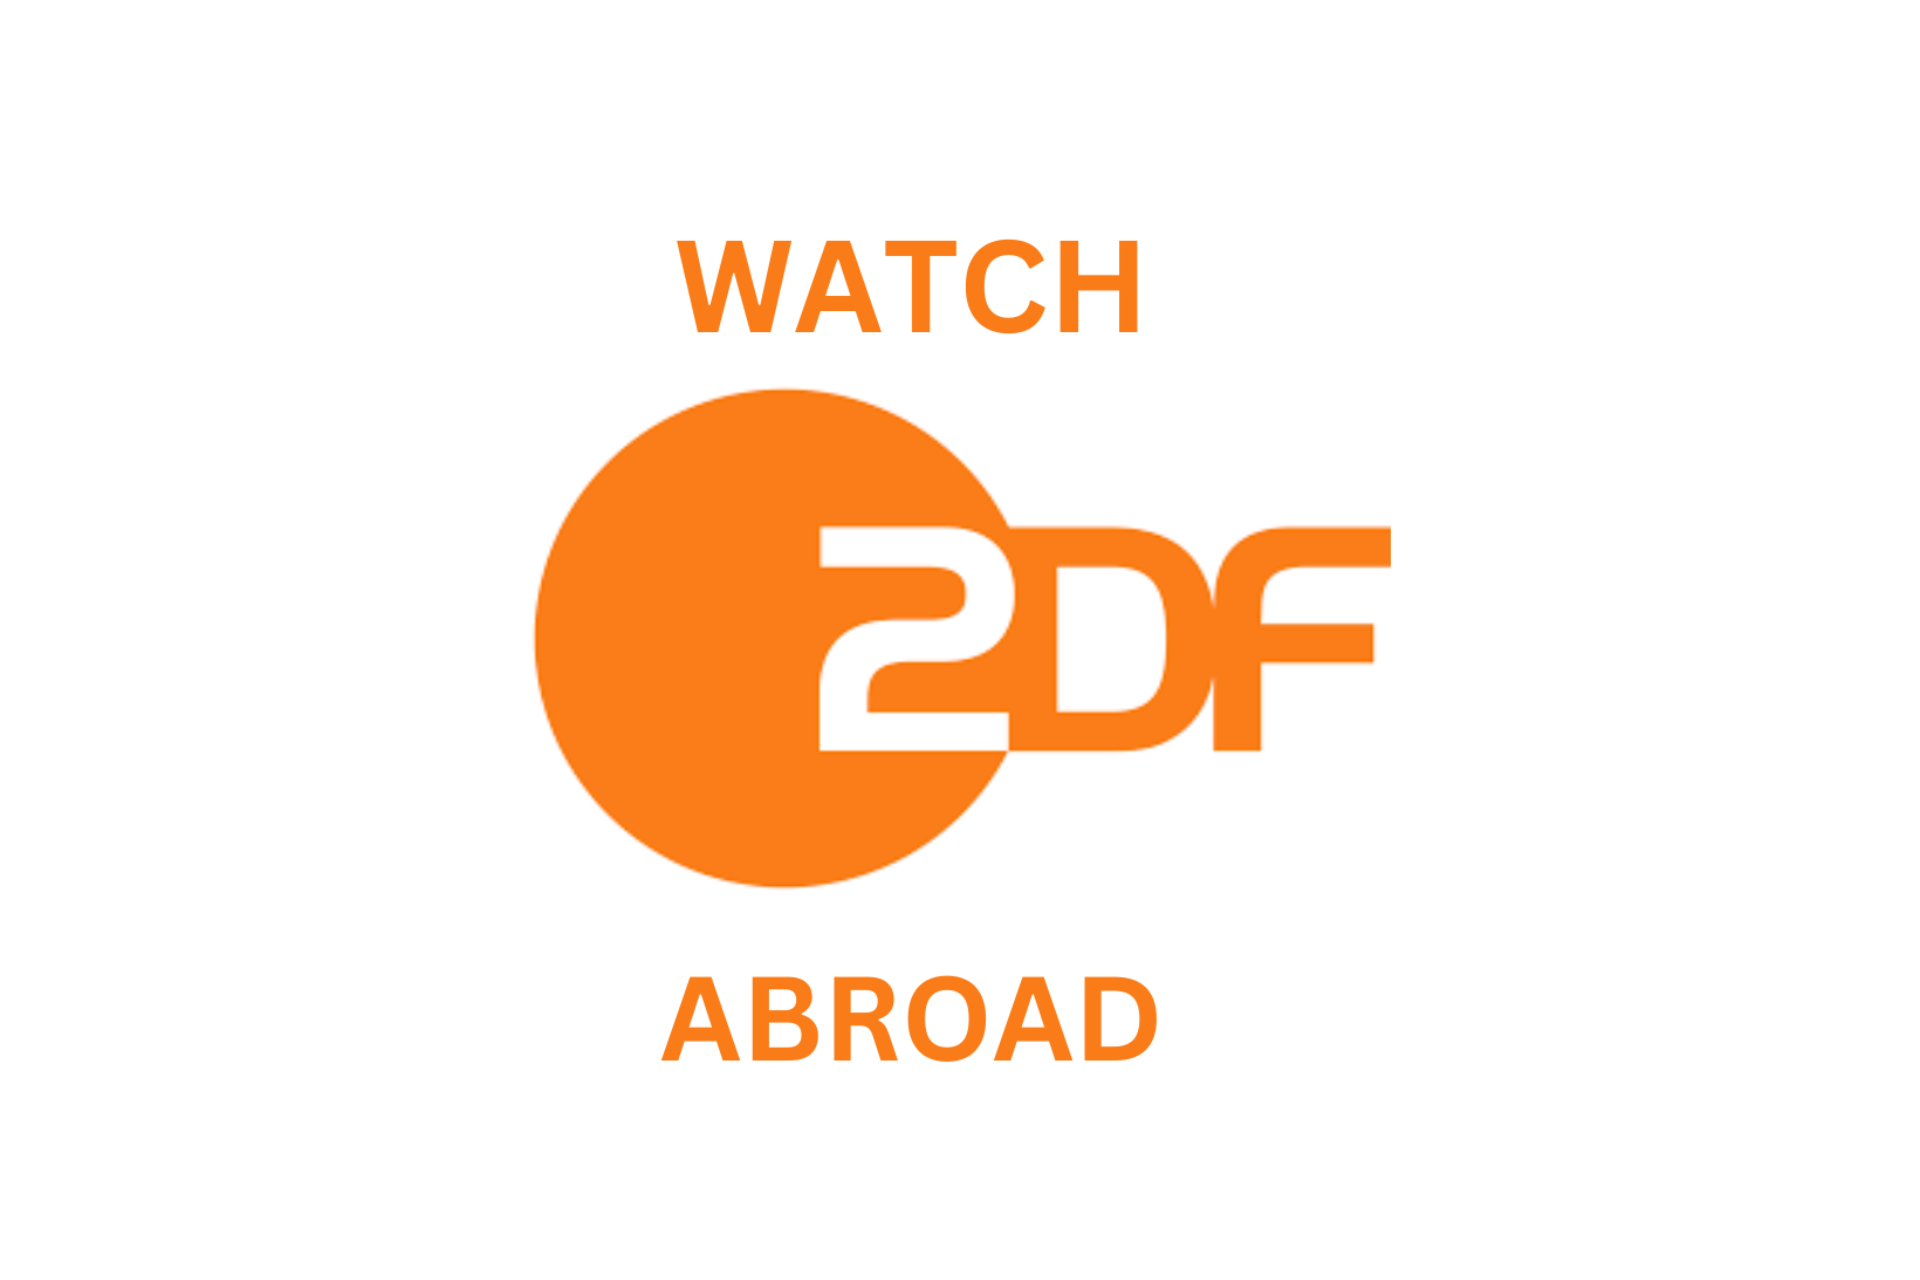 How to Watch ZDF Abroad [100% Working]